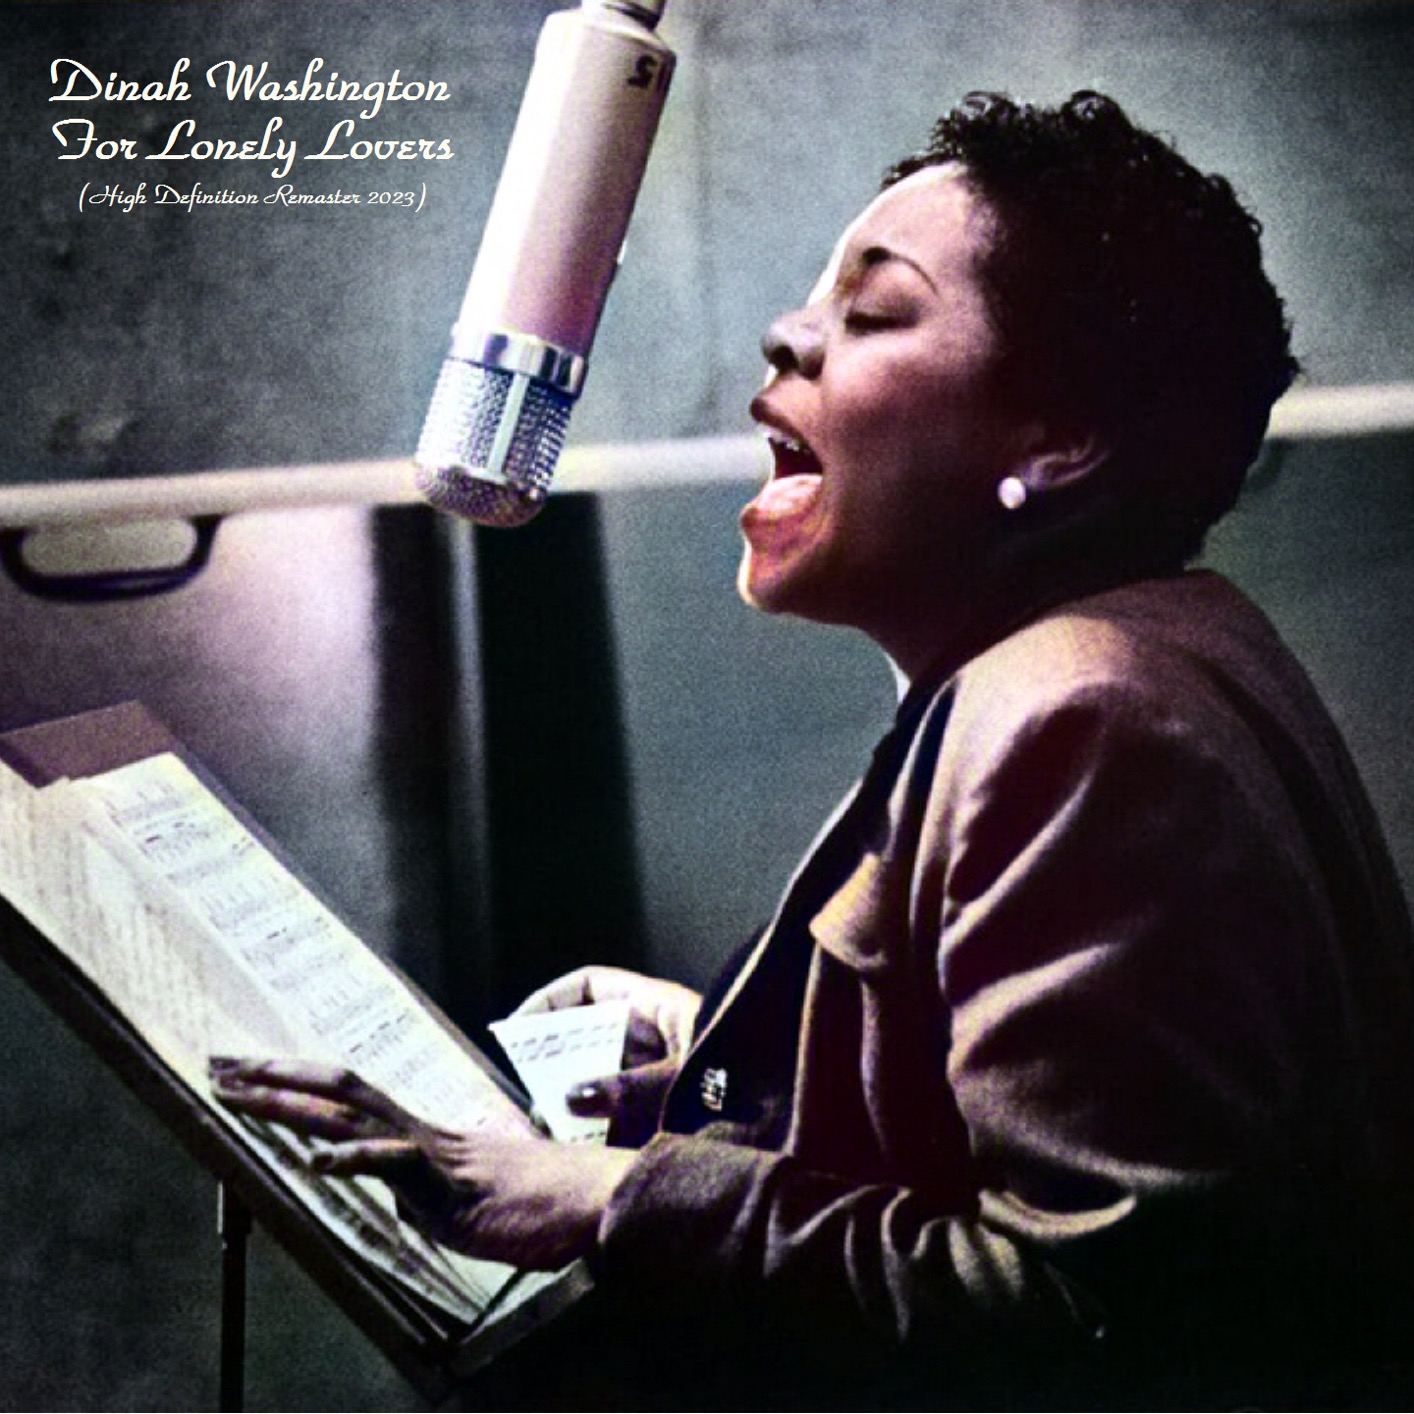 Dinah Washington - For Lonely Lovers (High Definition Remaster 2023) (2022/2023) [FLAC 24bit/44,1kHz] Download